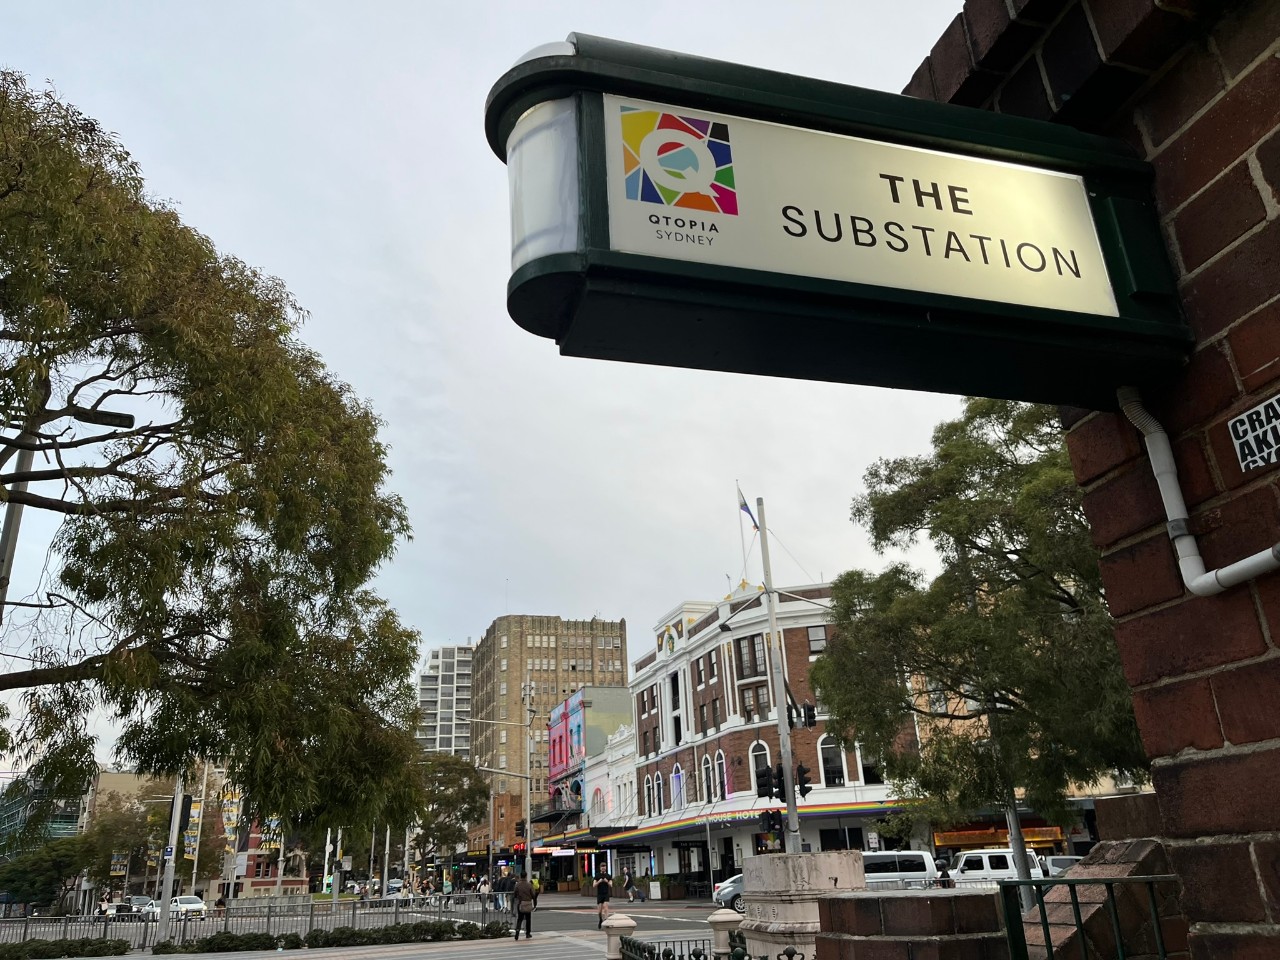 A photograph looking out across Taylor Square from Qtopia, in Darlinghurst, Sydney. In the foreground is a sign that reads "Qtopia Sydney: The Substation" and in the background are trees, a busy city street, and buildings. The Courthouse Hotel's sign is rainbow to indicate that it is a safe space for the LGBTQIA+ community.